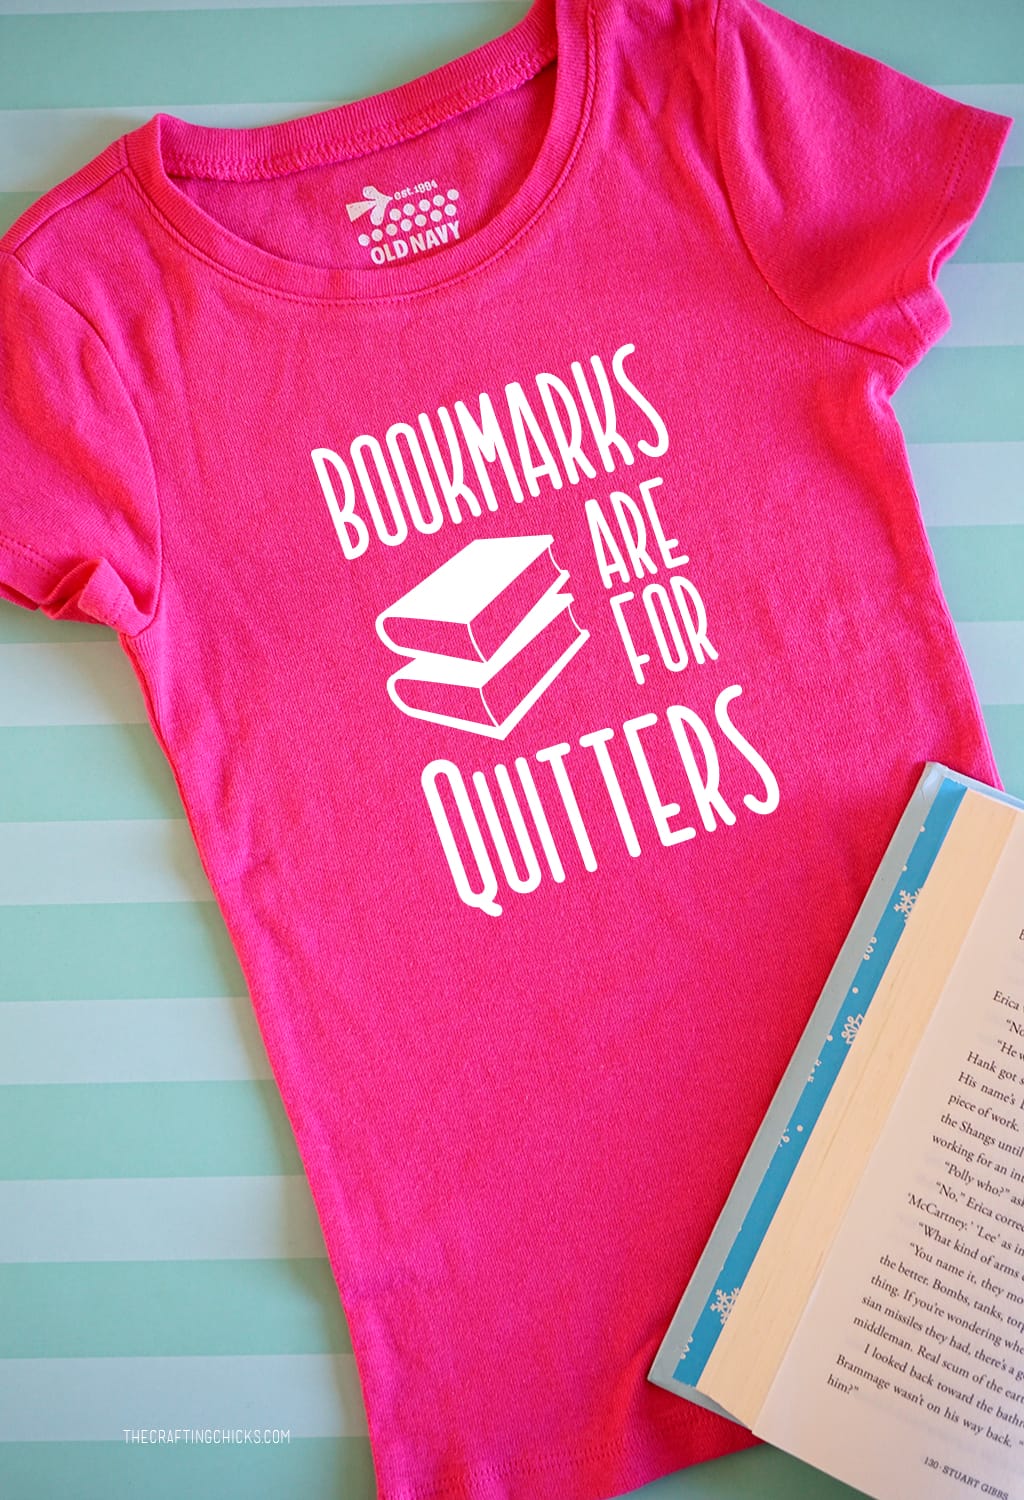 Bookmarks are for Quitters shirt